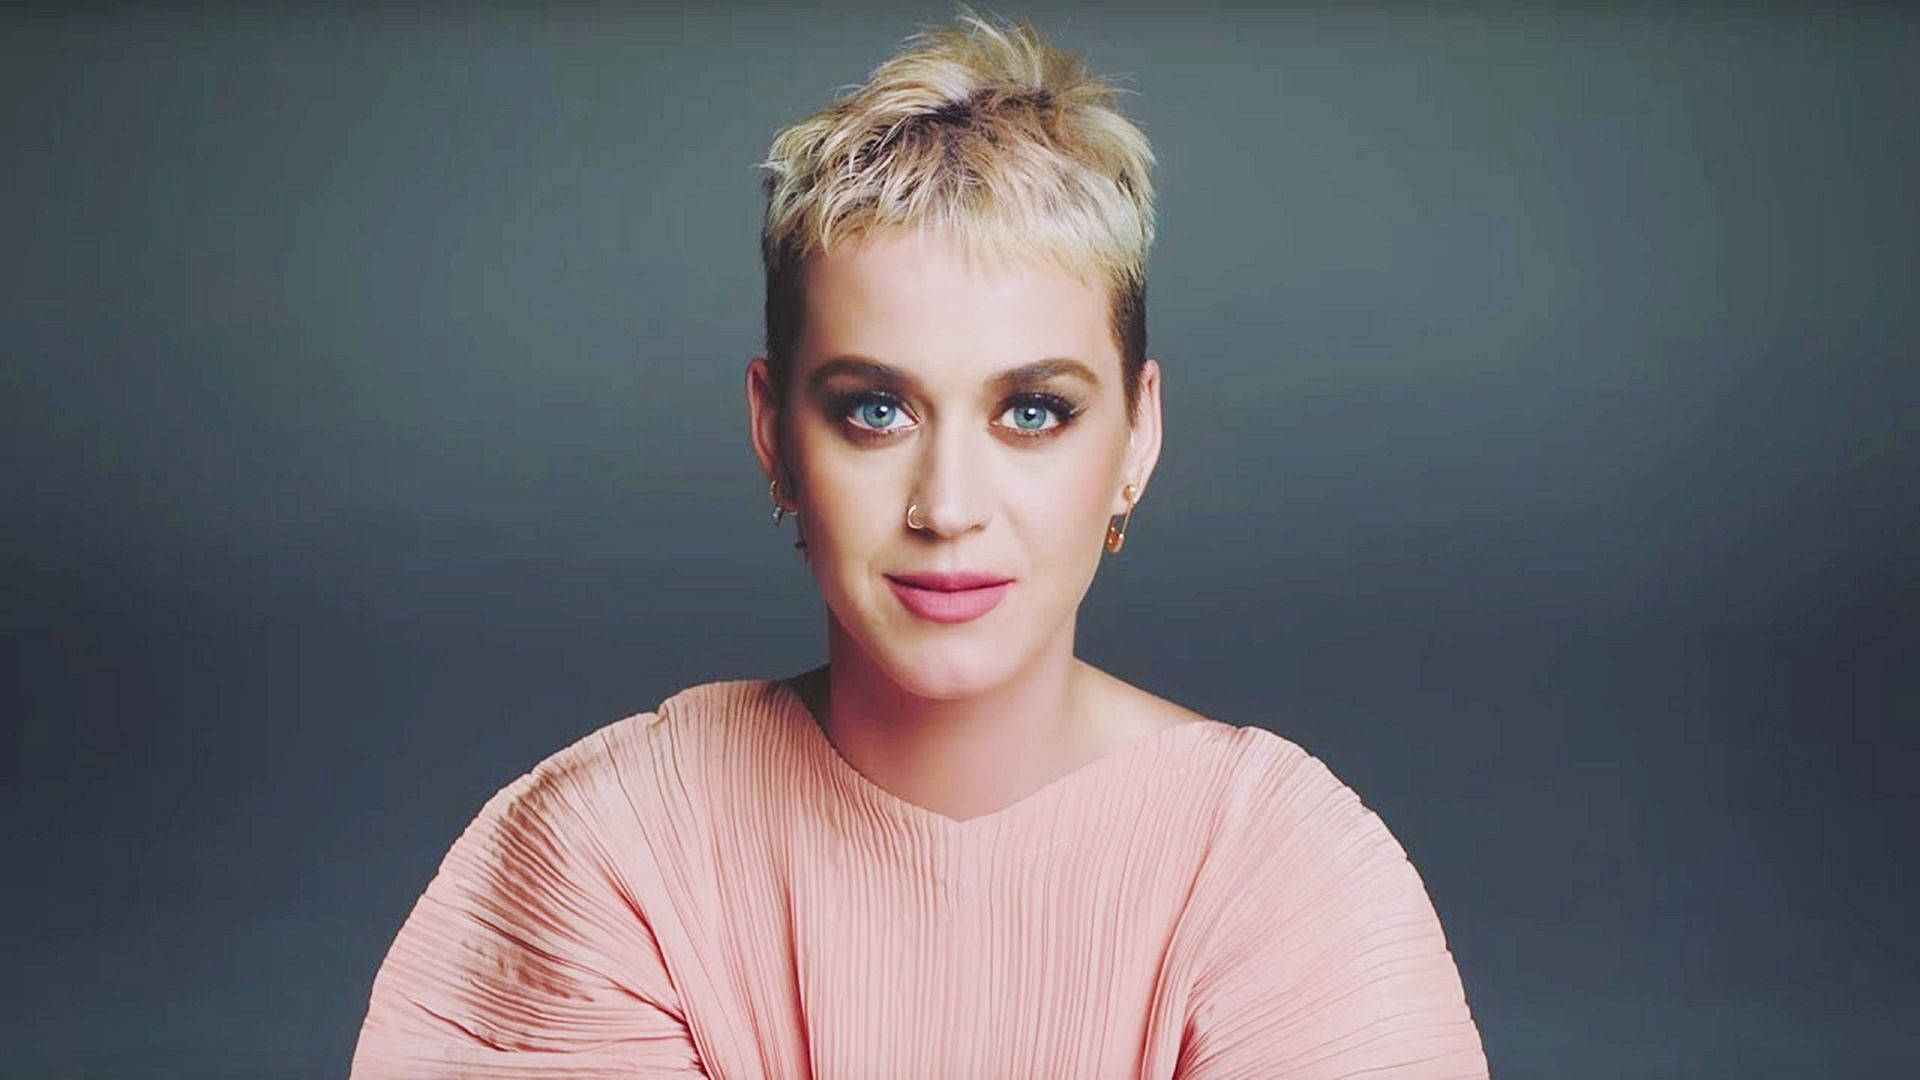 Katy Perry Smiles Brightly During Her Pixie Cut Photoshoot Background